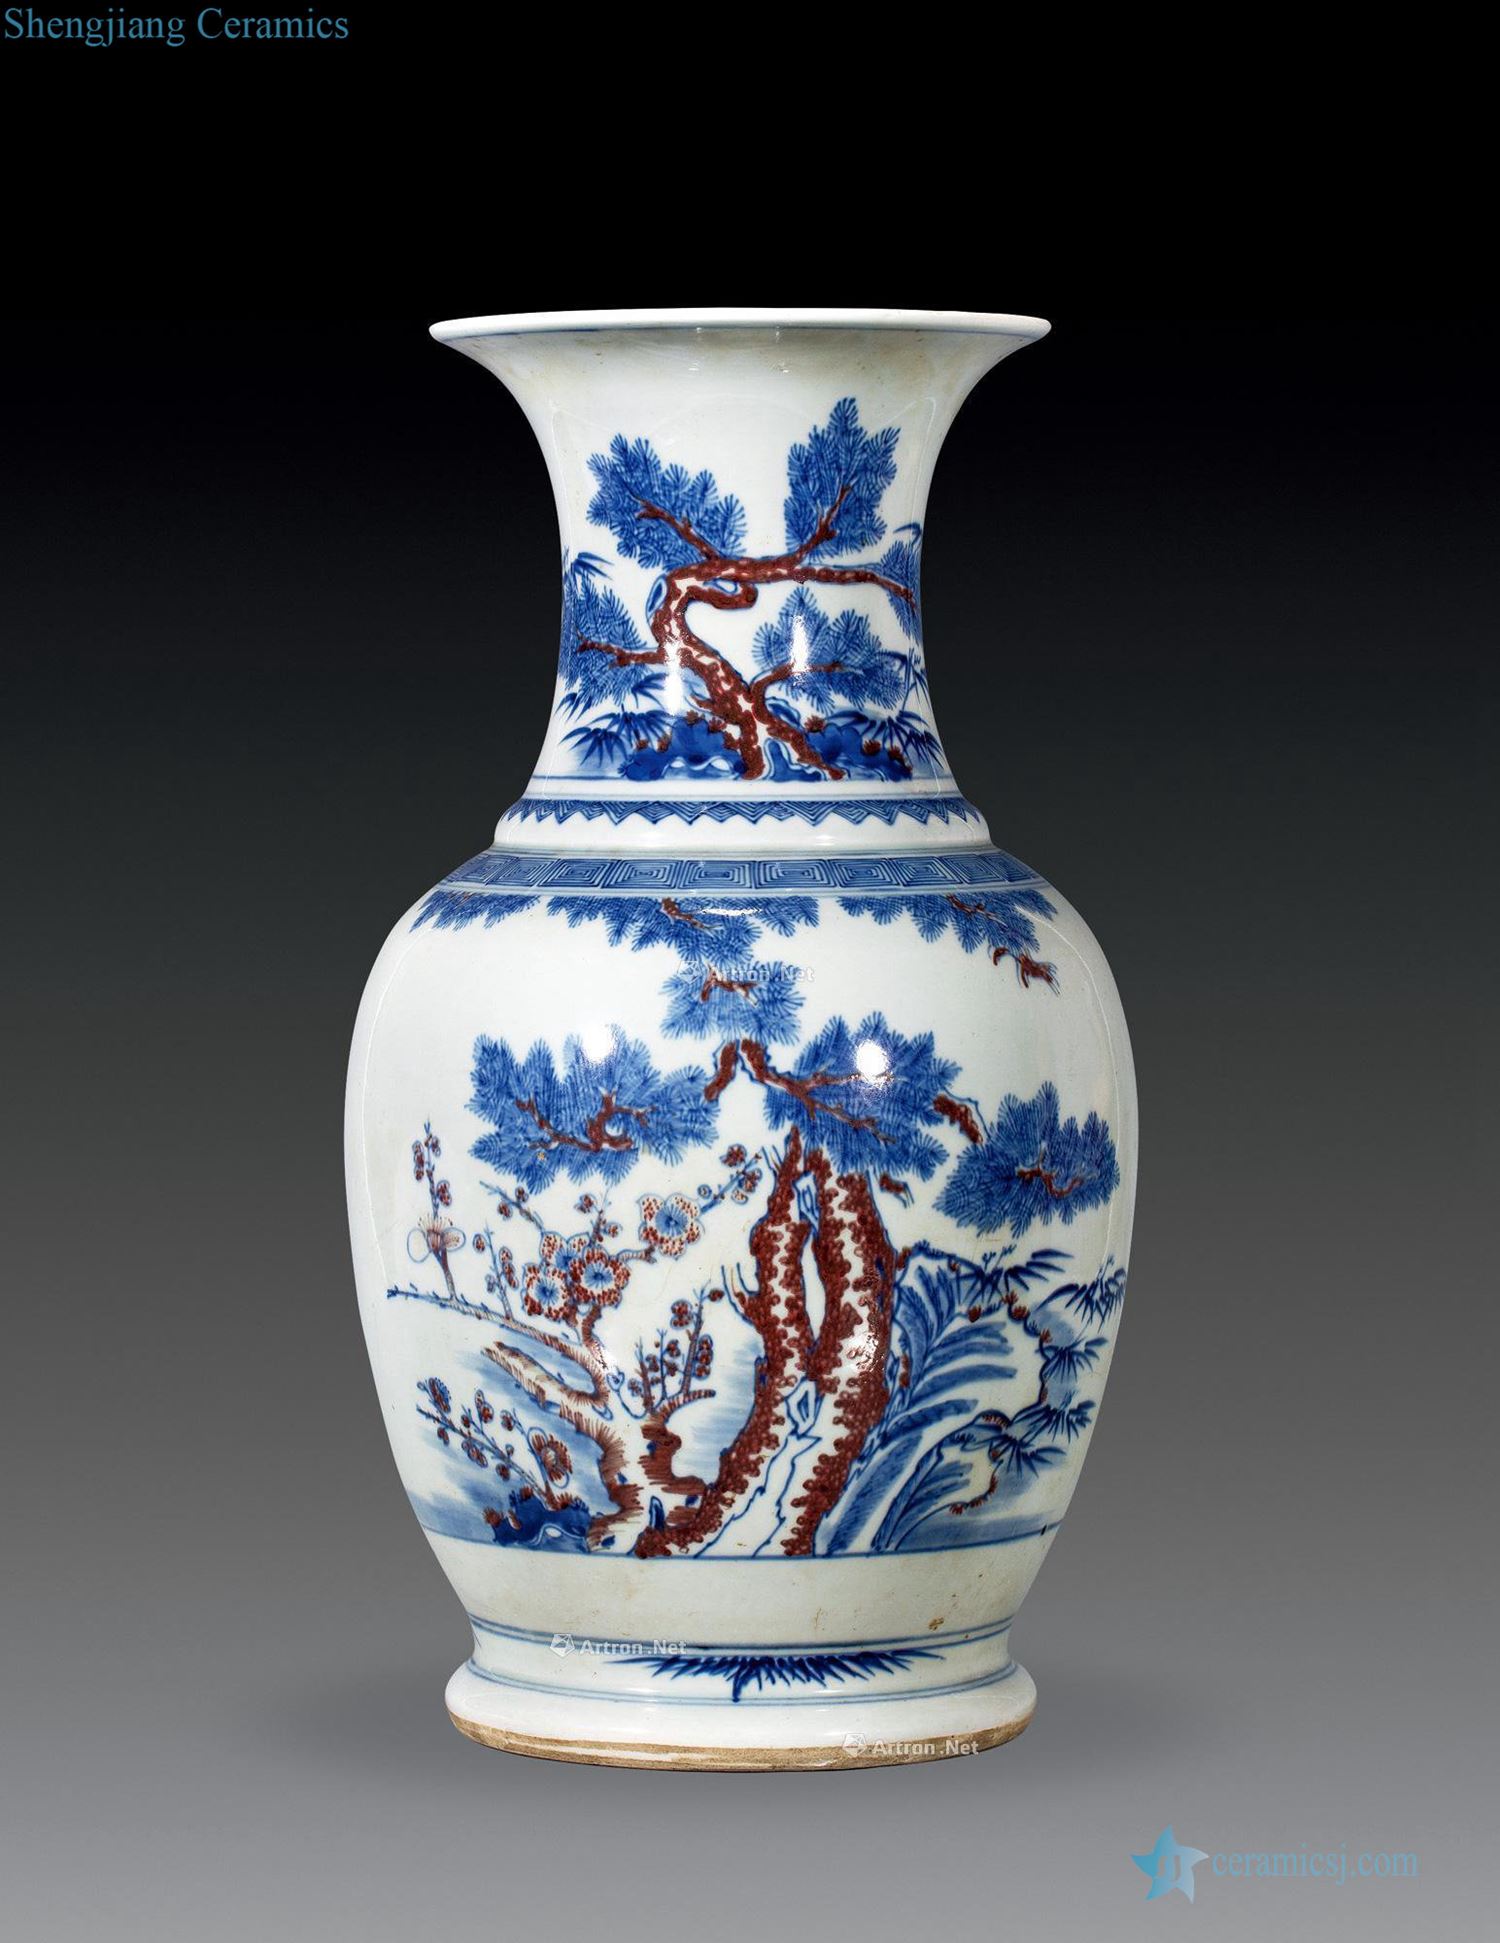 Qing dynasty blue-and-white youligong poetic figure vase